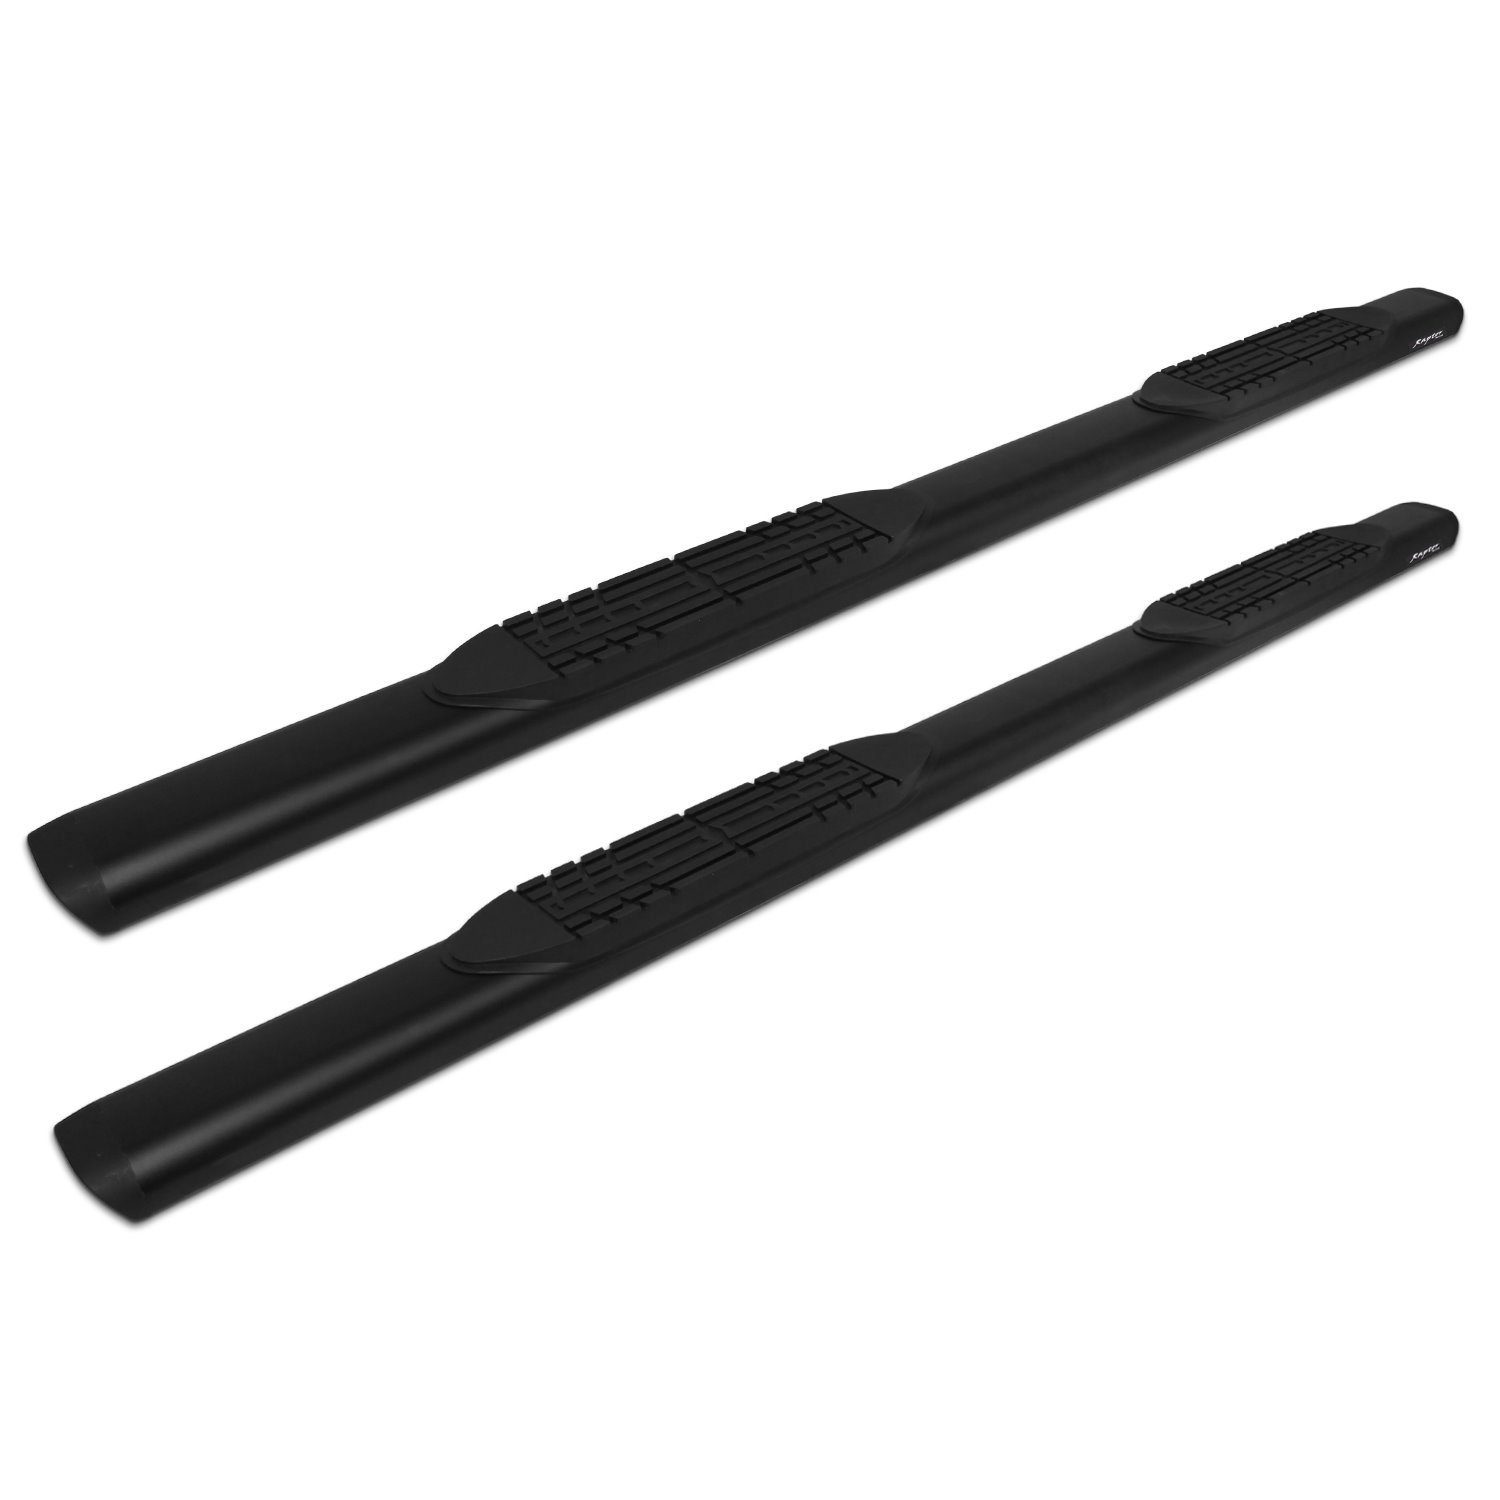 2003-0377BT Raptor Series 5 in Oval Style Slide Track Running Boards, Black Textured Aluminum, Fits Select Ford Ranger Crew Cab